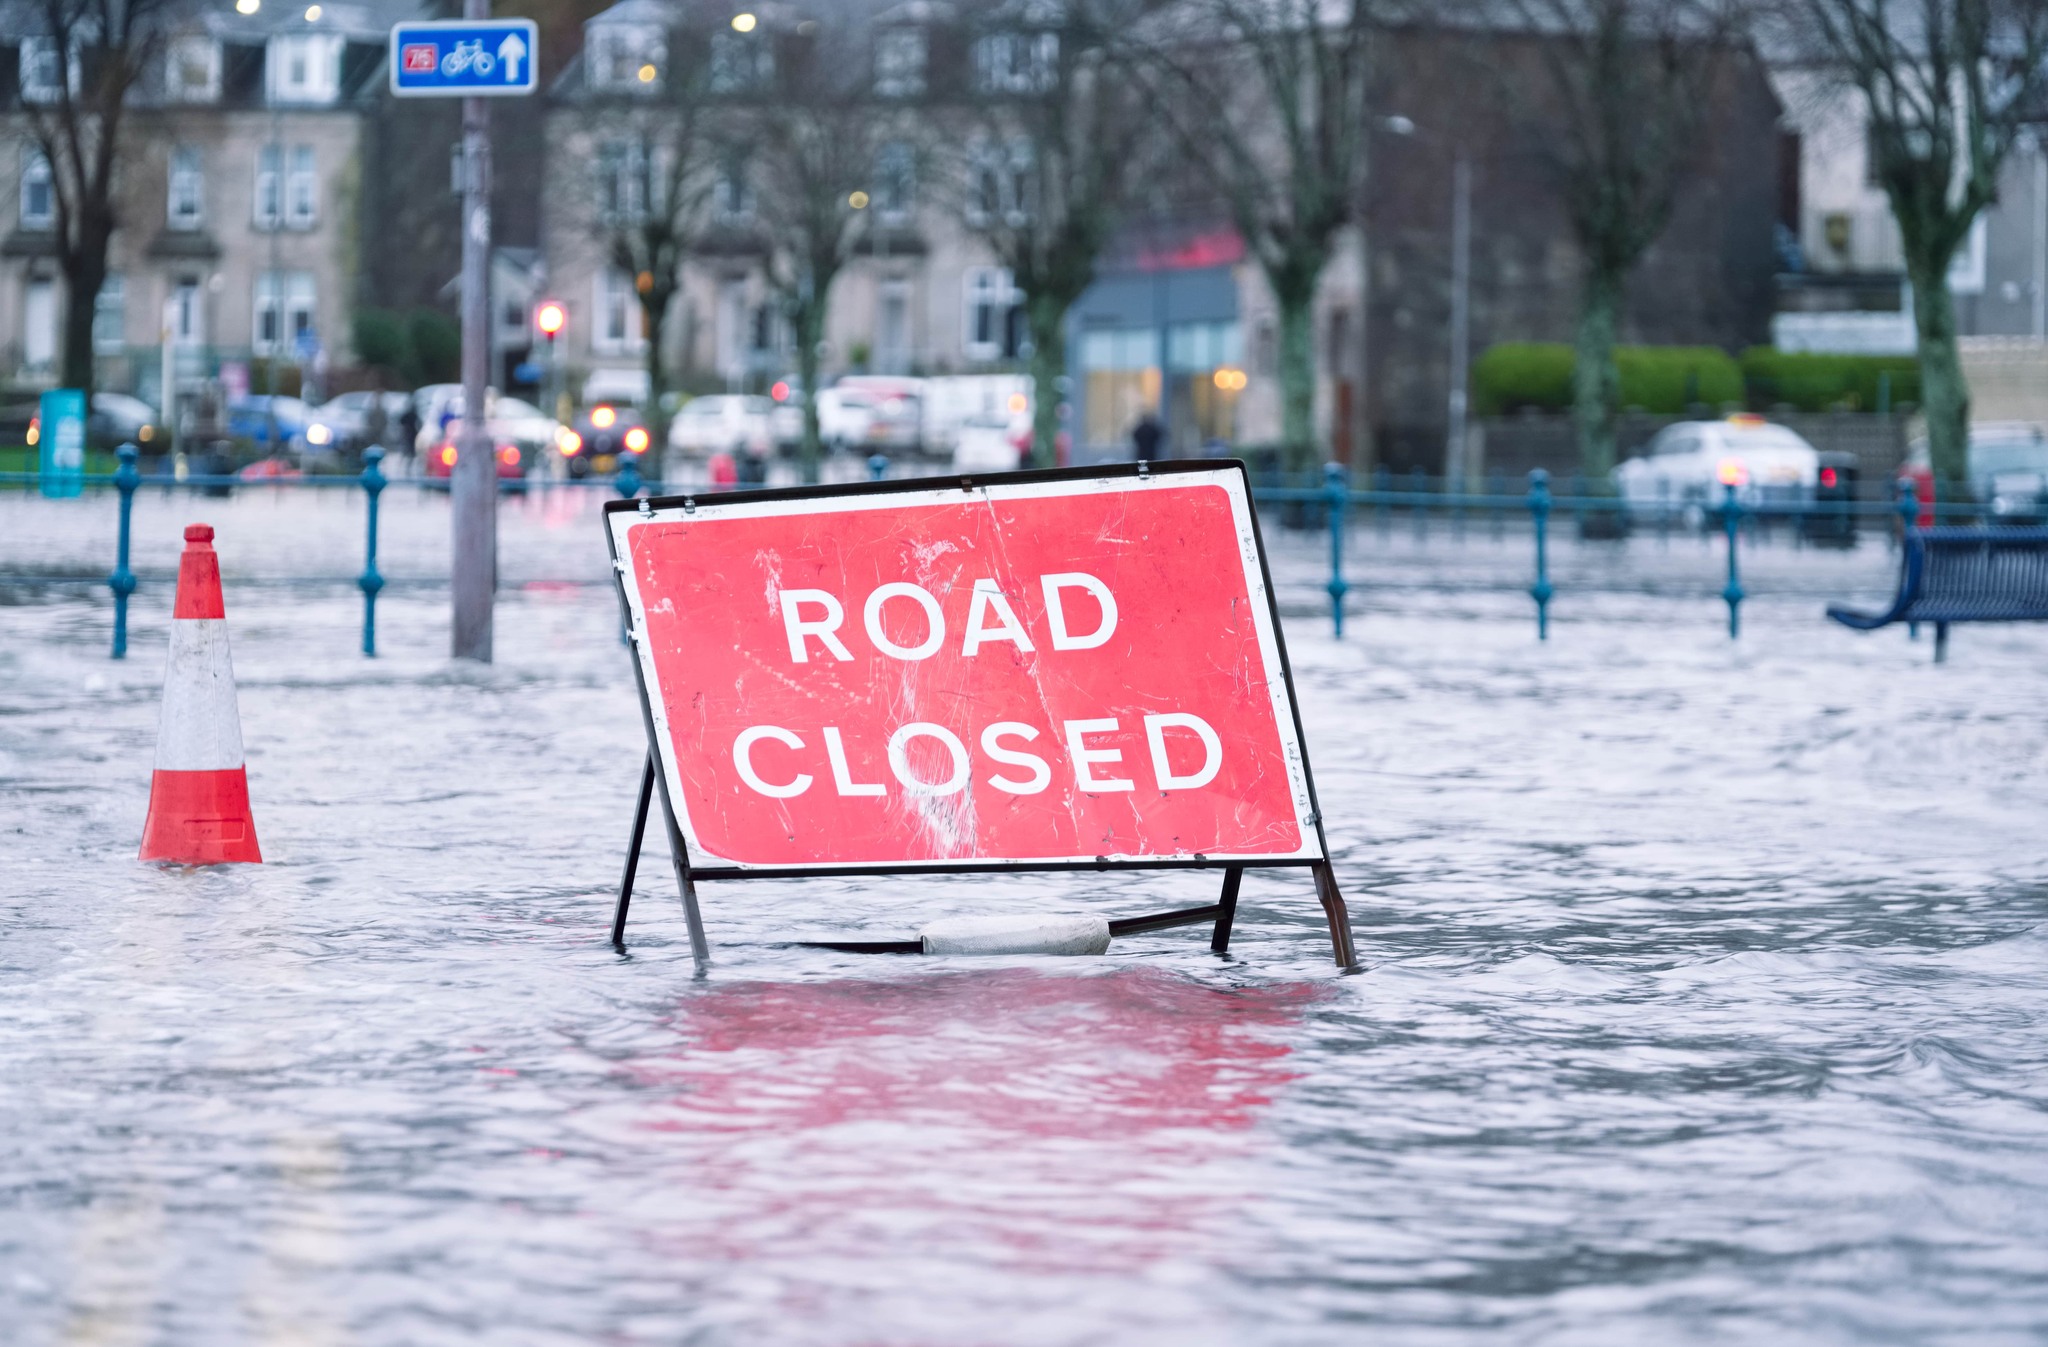 'Road closed' sign on a flooded street.